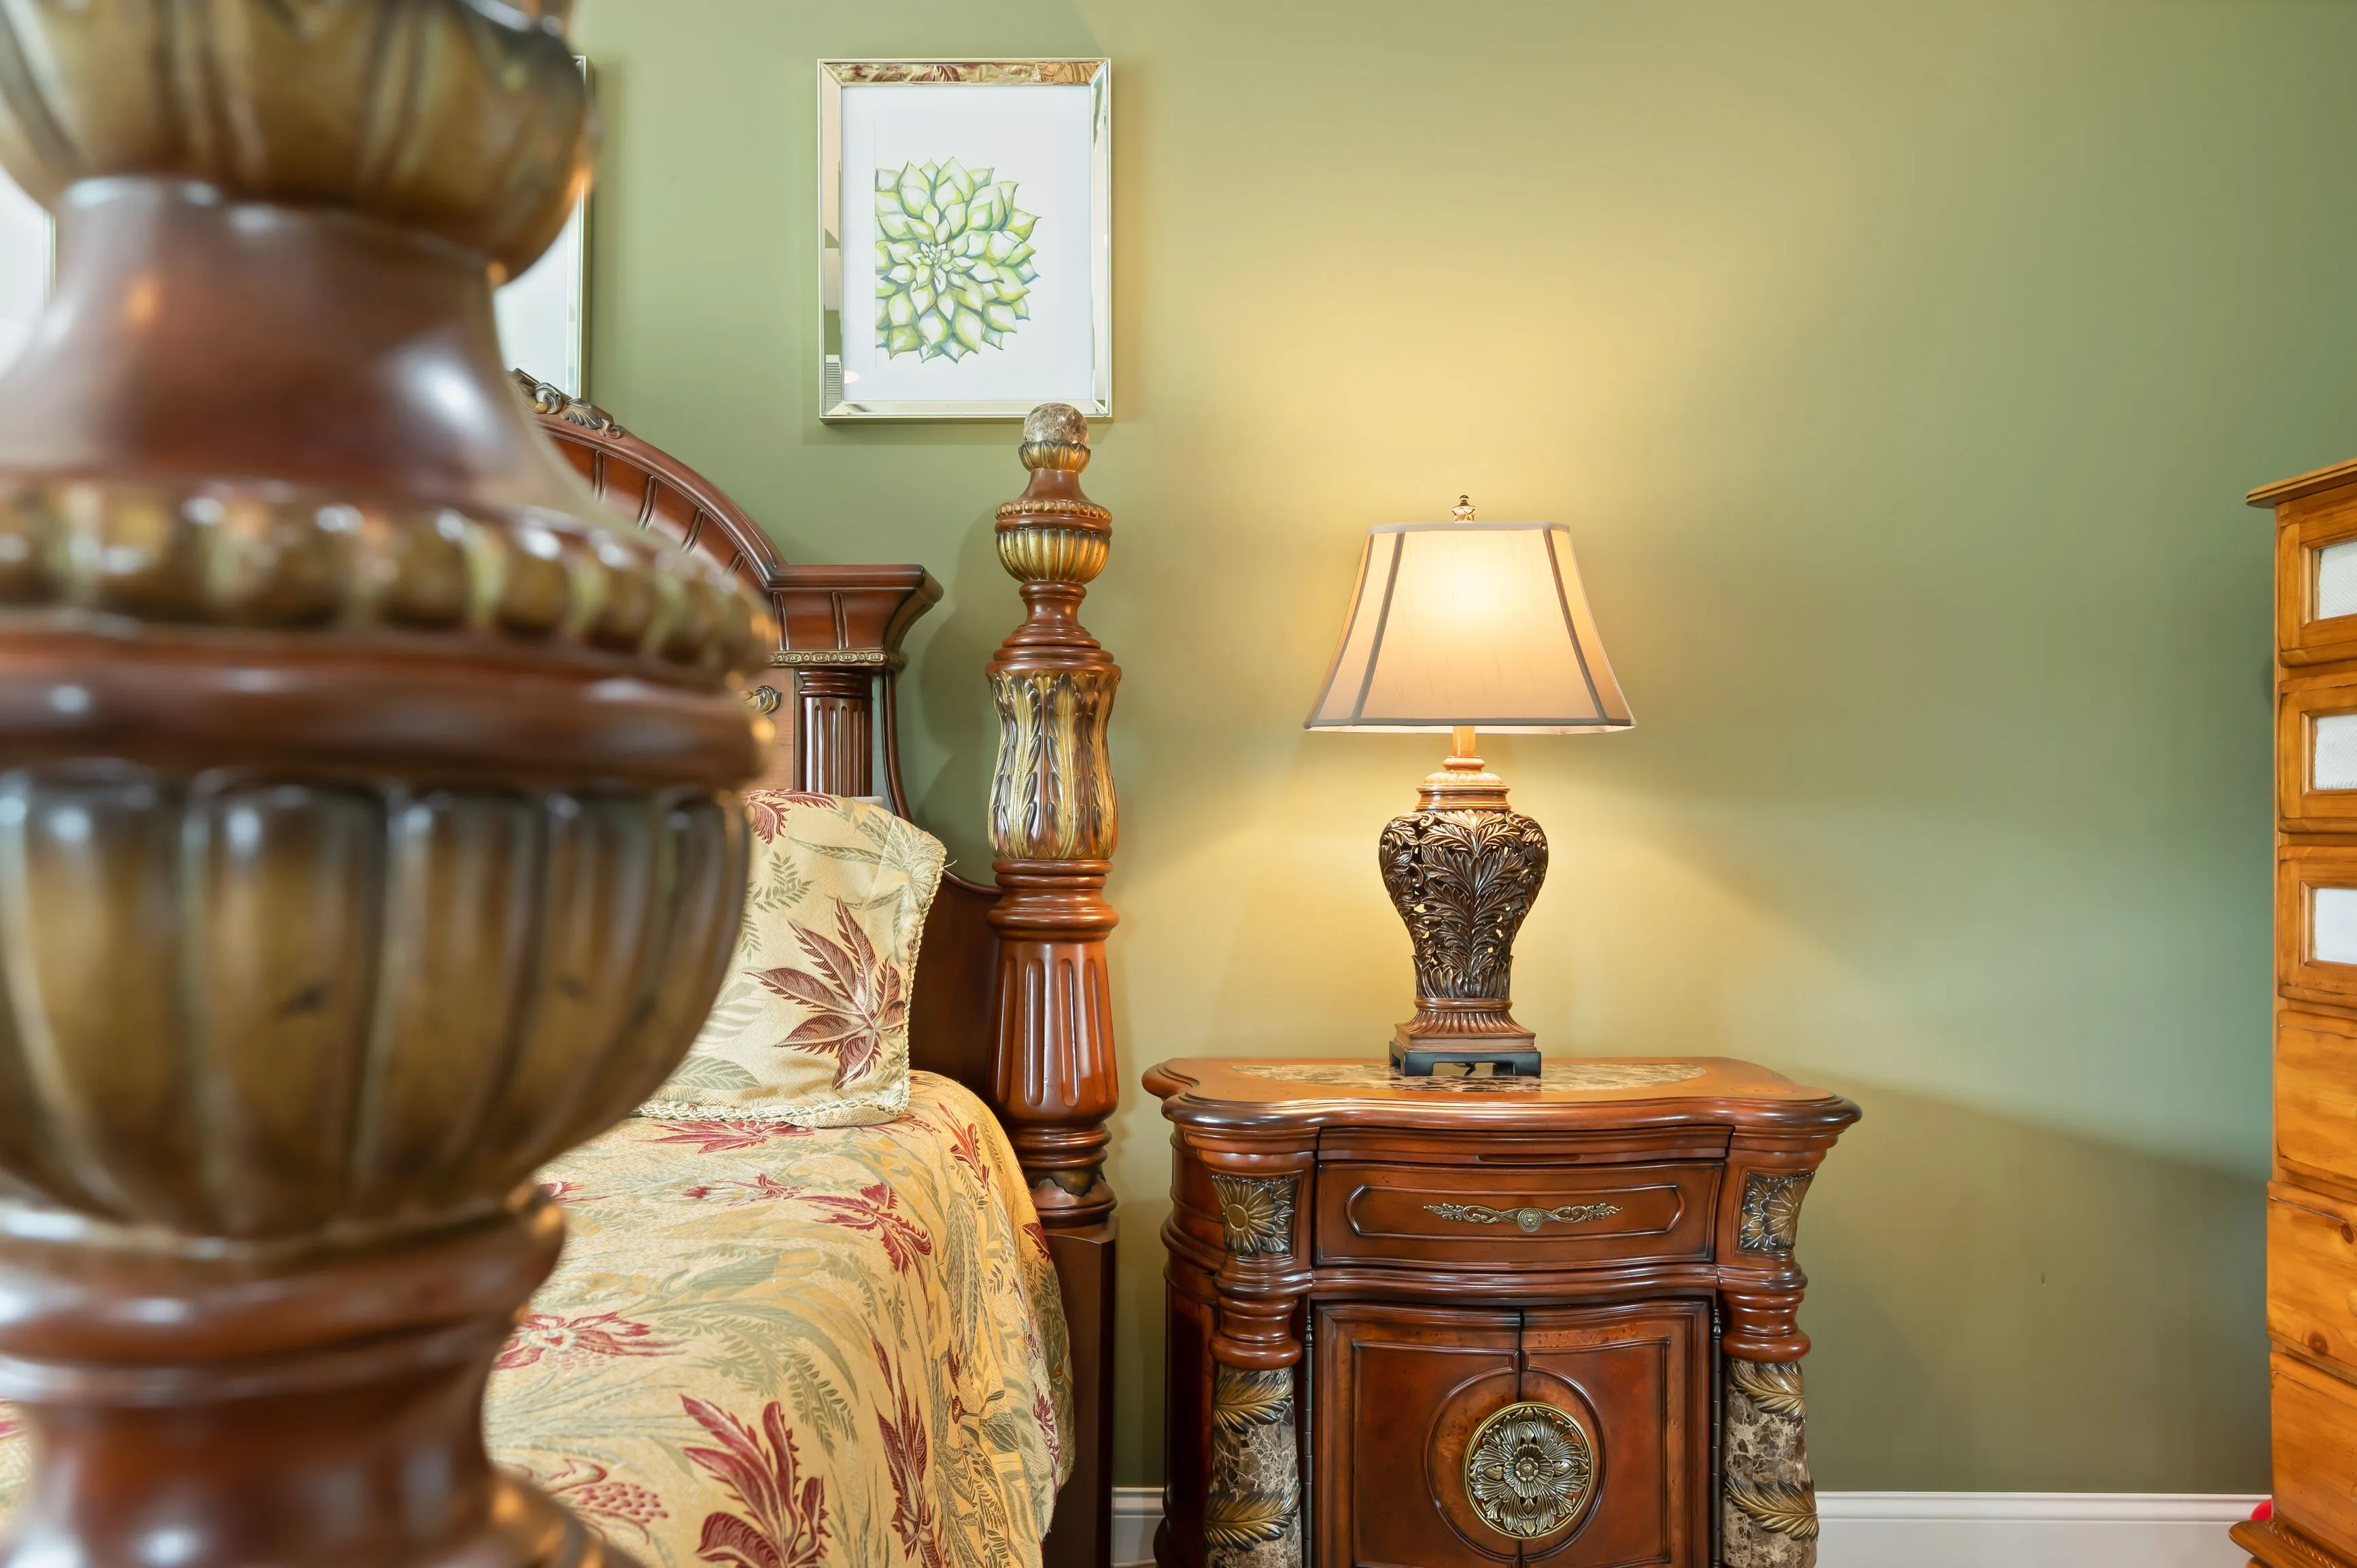 Elegant bedroom interior with carved wooden furniture, ornate table lamp, and artwork on green wall.